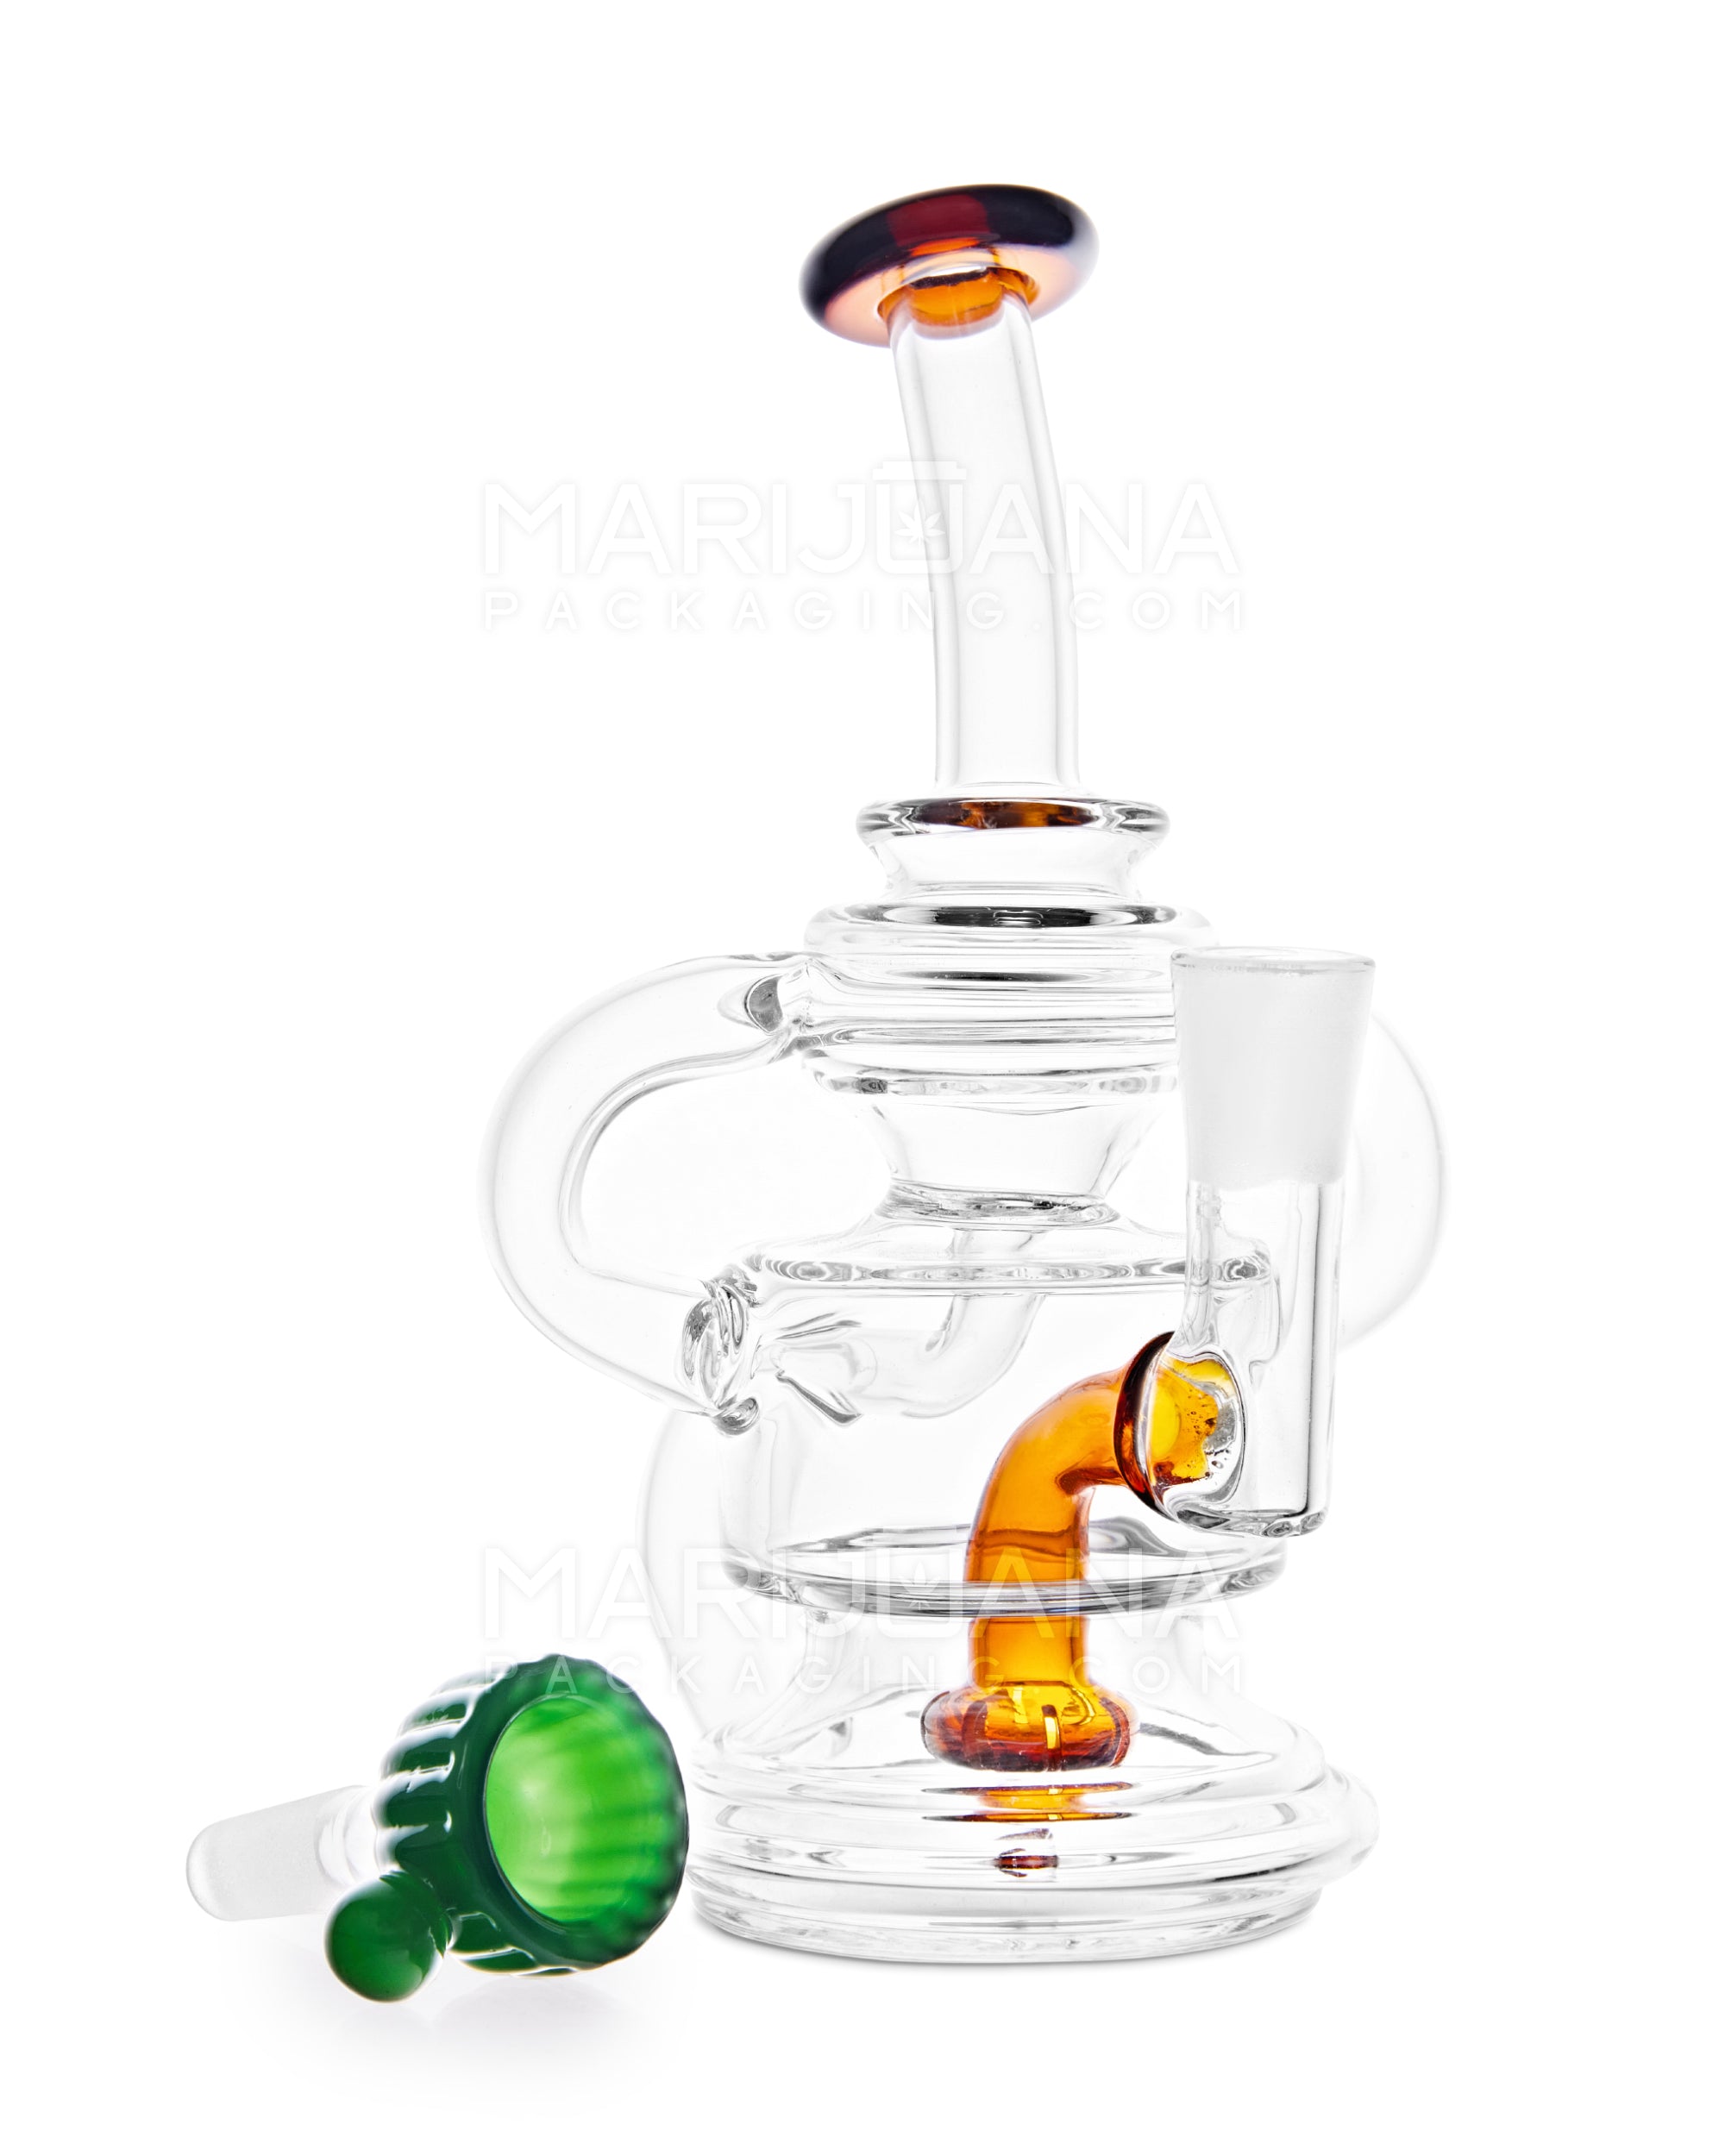 USA Glass | Bent Neck Dual Uptake Recycler Water Pipe w/ Showerhead Perc | 5.5in Tall - 10mm Bowl - Amber